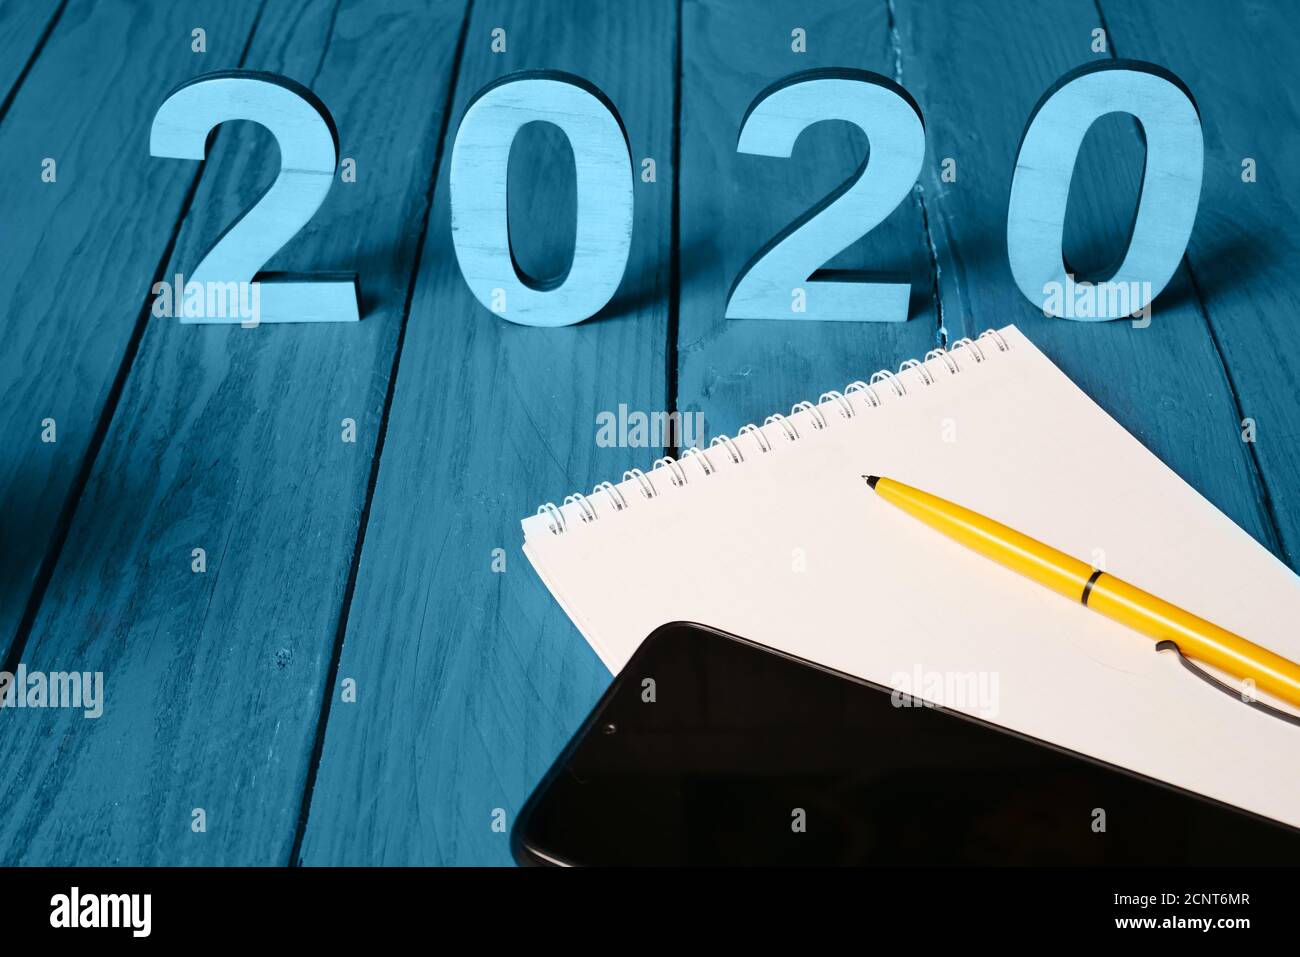 Planing concept idea for 2020 year. Twenty twenty, smart phone and notebook blank space with yellow pen on wooden surface blue color. Stock Photo